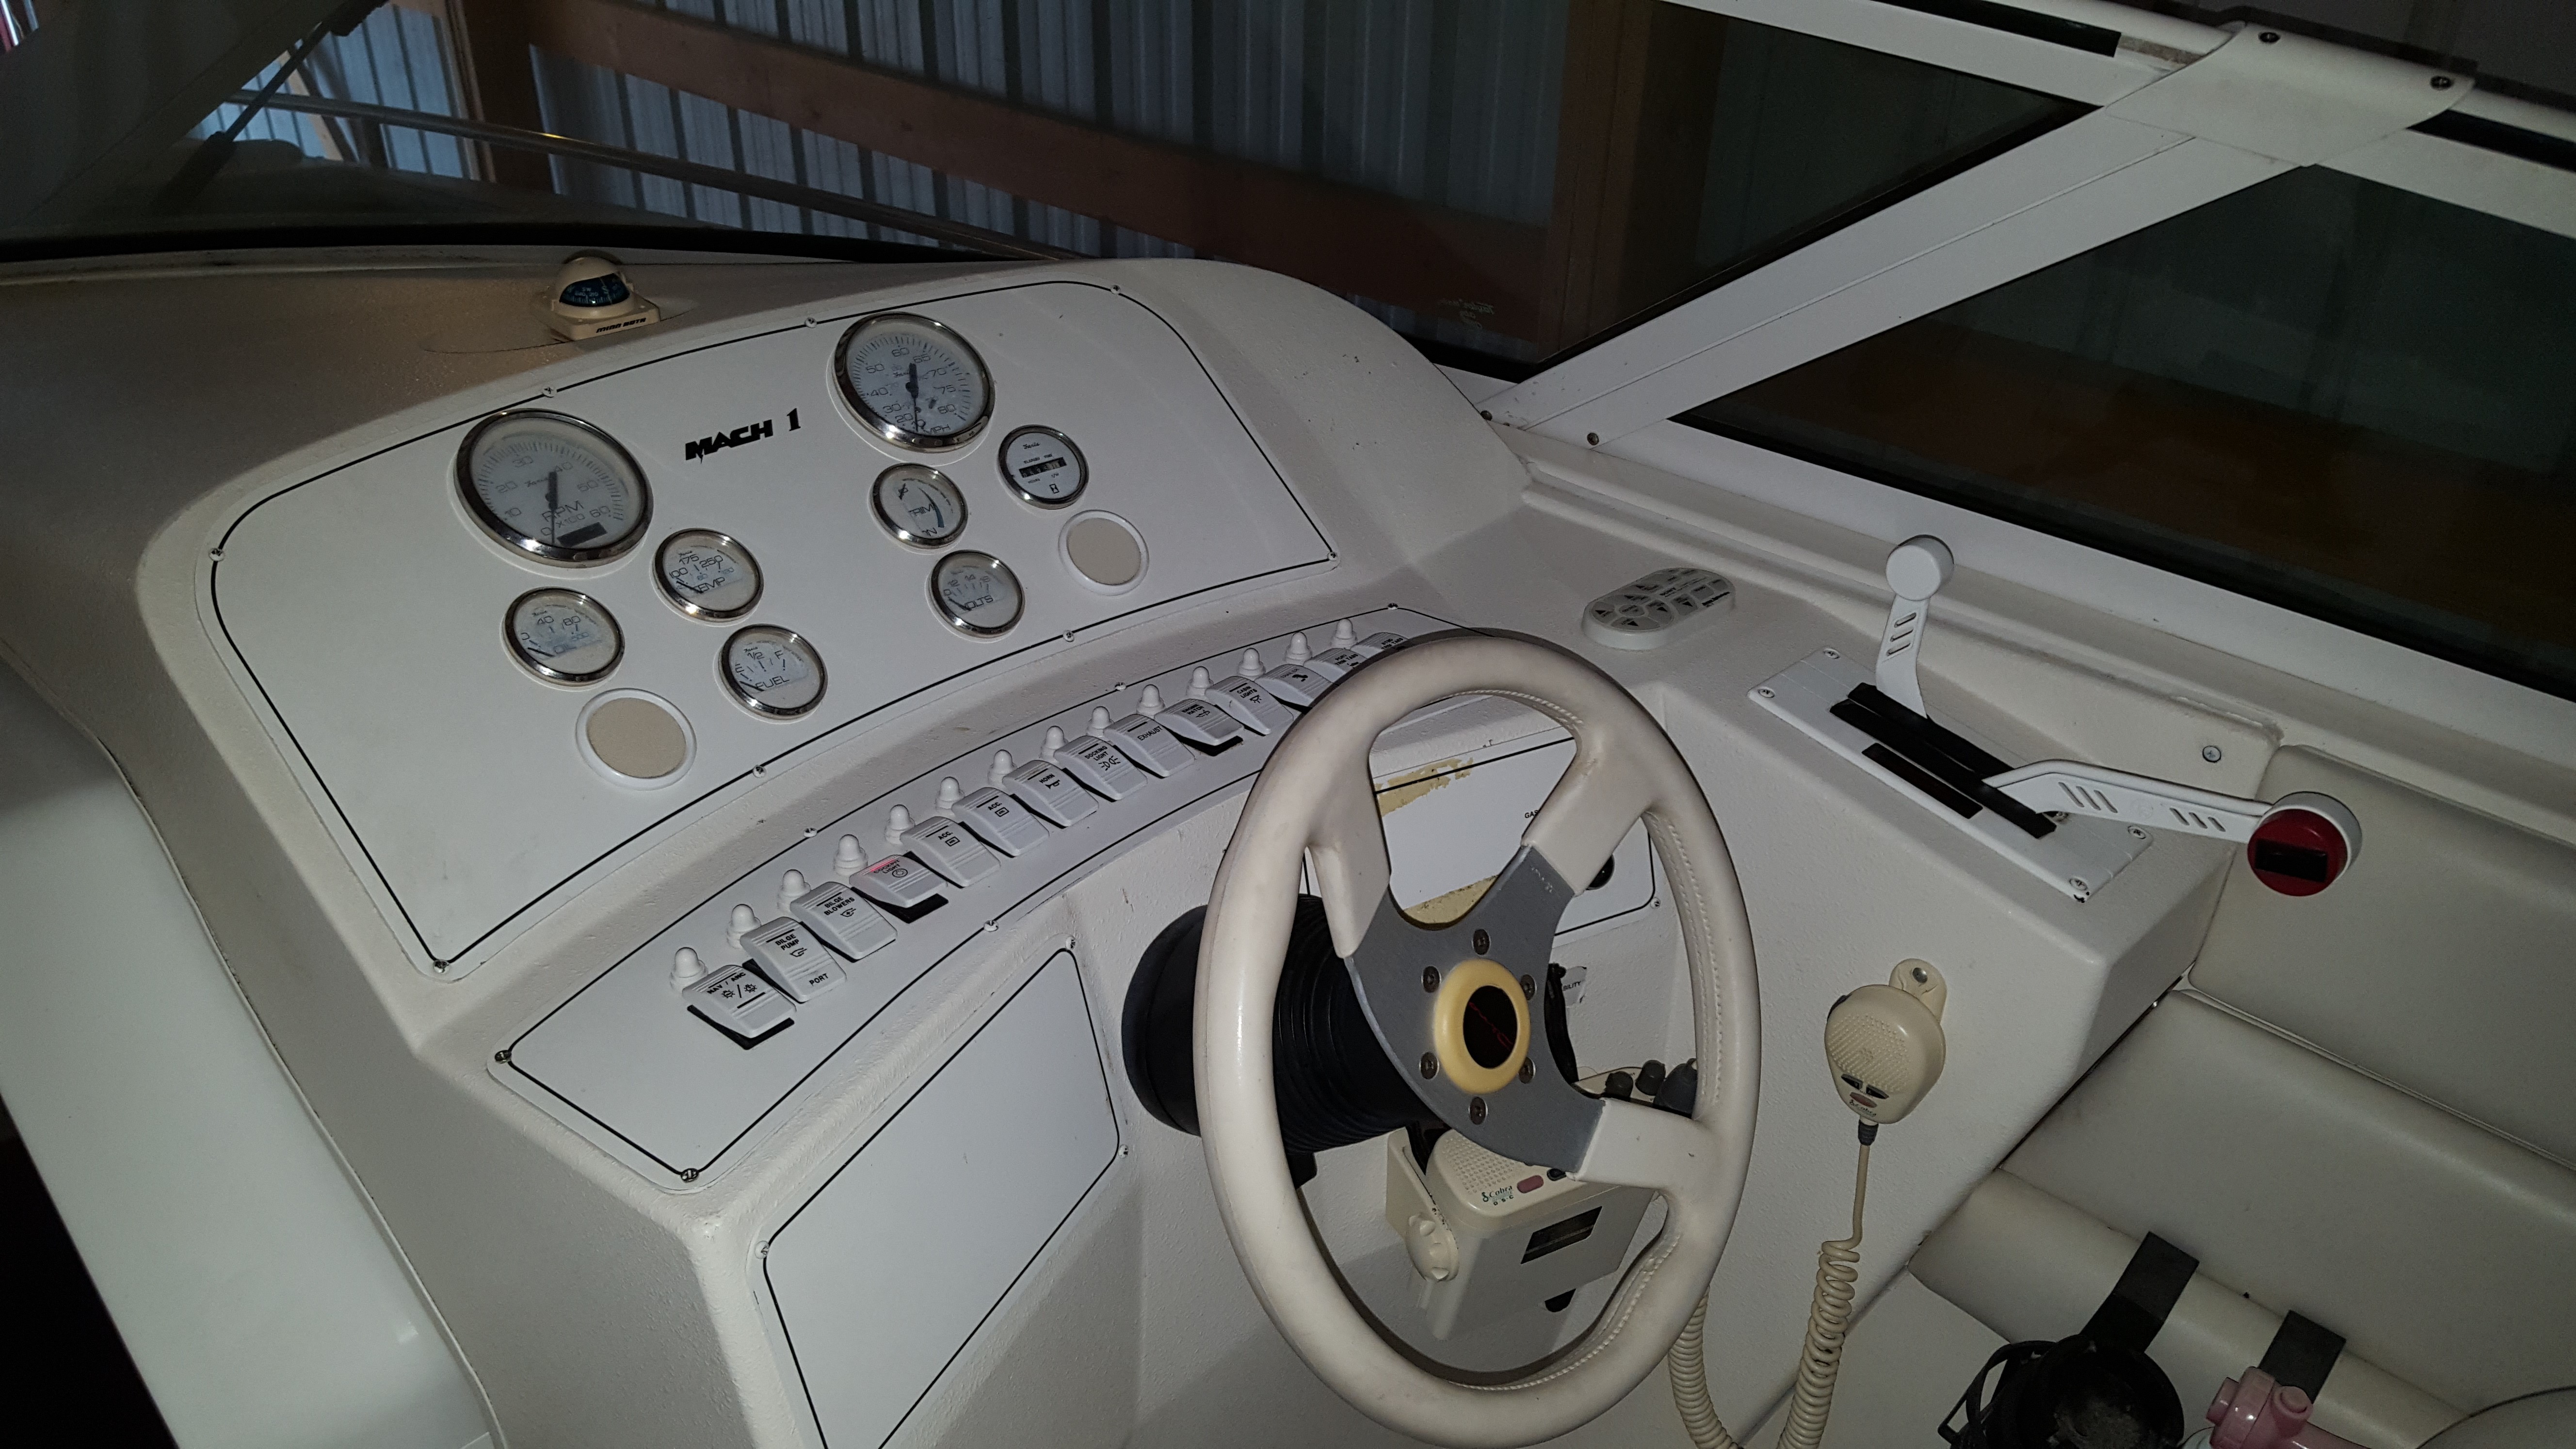 2000 Baja Mach 1 Power boat for sale in Purdy, MO - image 8 